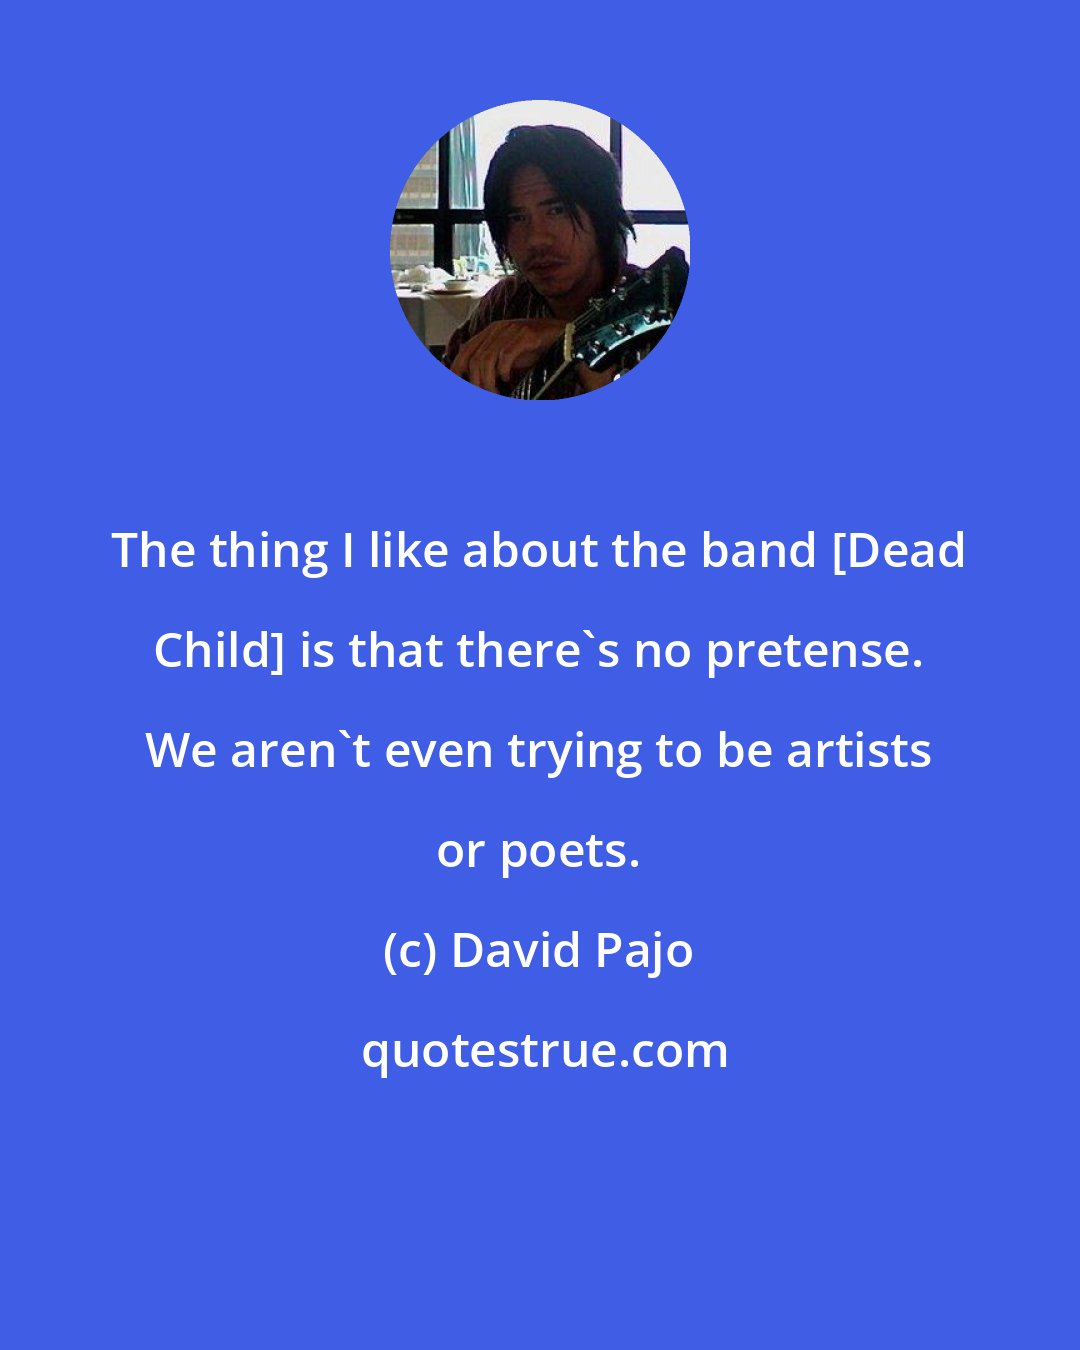 David Pajo: The thing I like about the band [Dead Child] is that there's no pretense. We aren't even trying to be artists or poets.